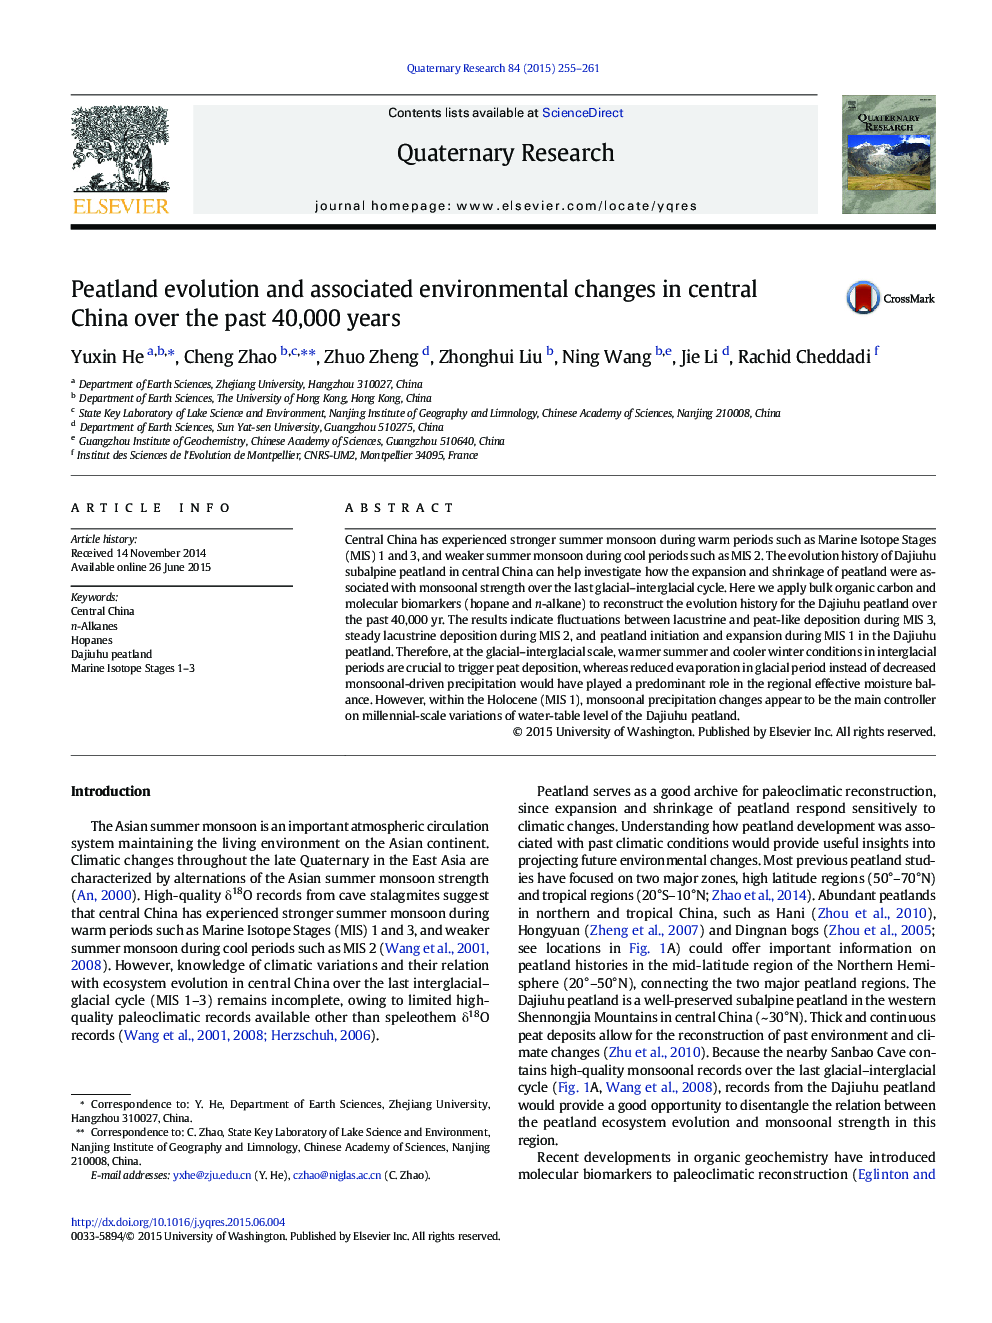 Peatland evolution and associated environmental changes in central China over the past 40,000 years